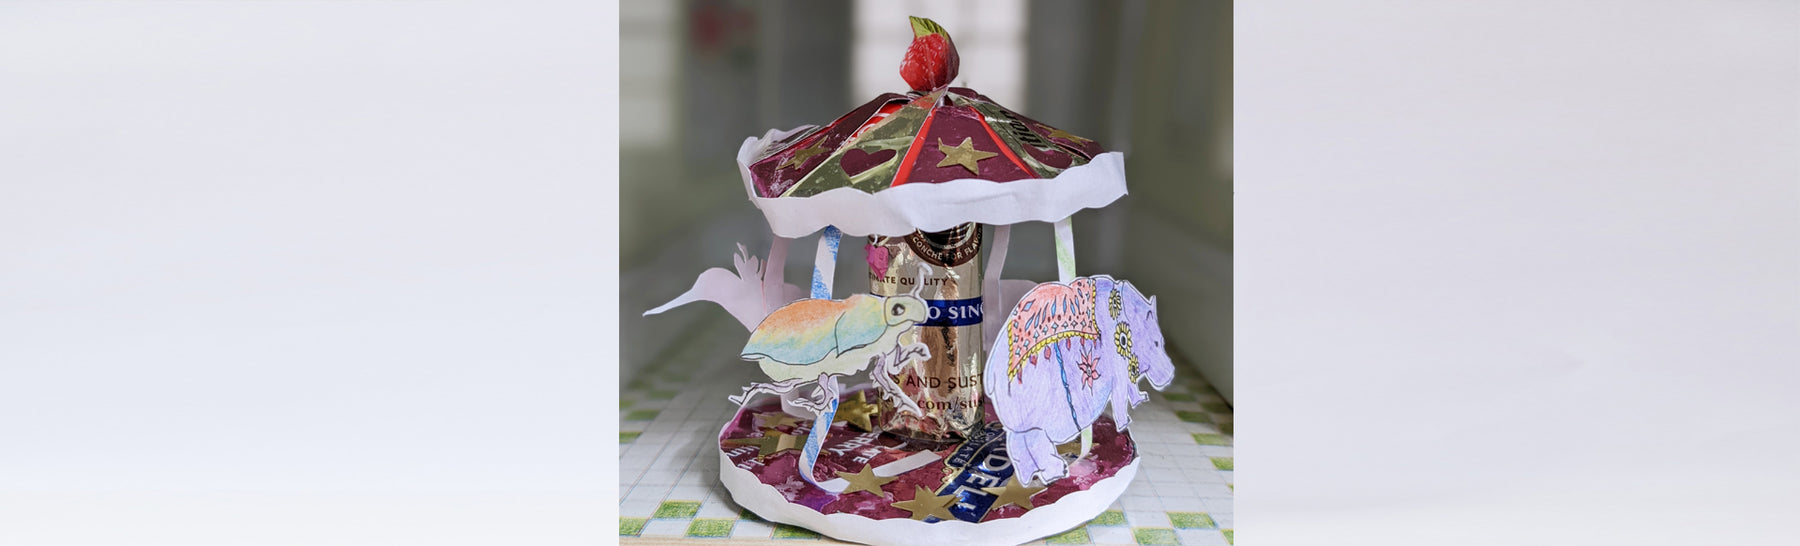 a paper sculpture with animals on a carousel